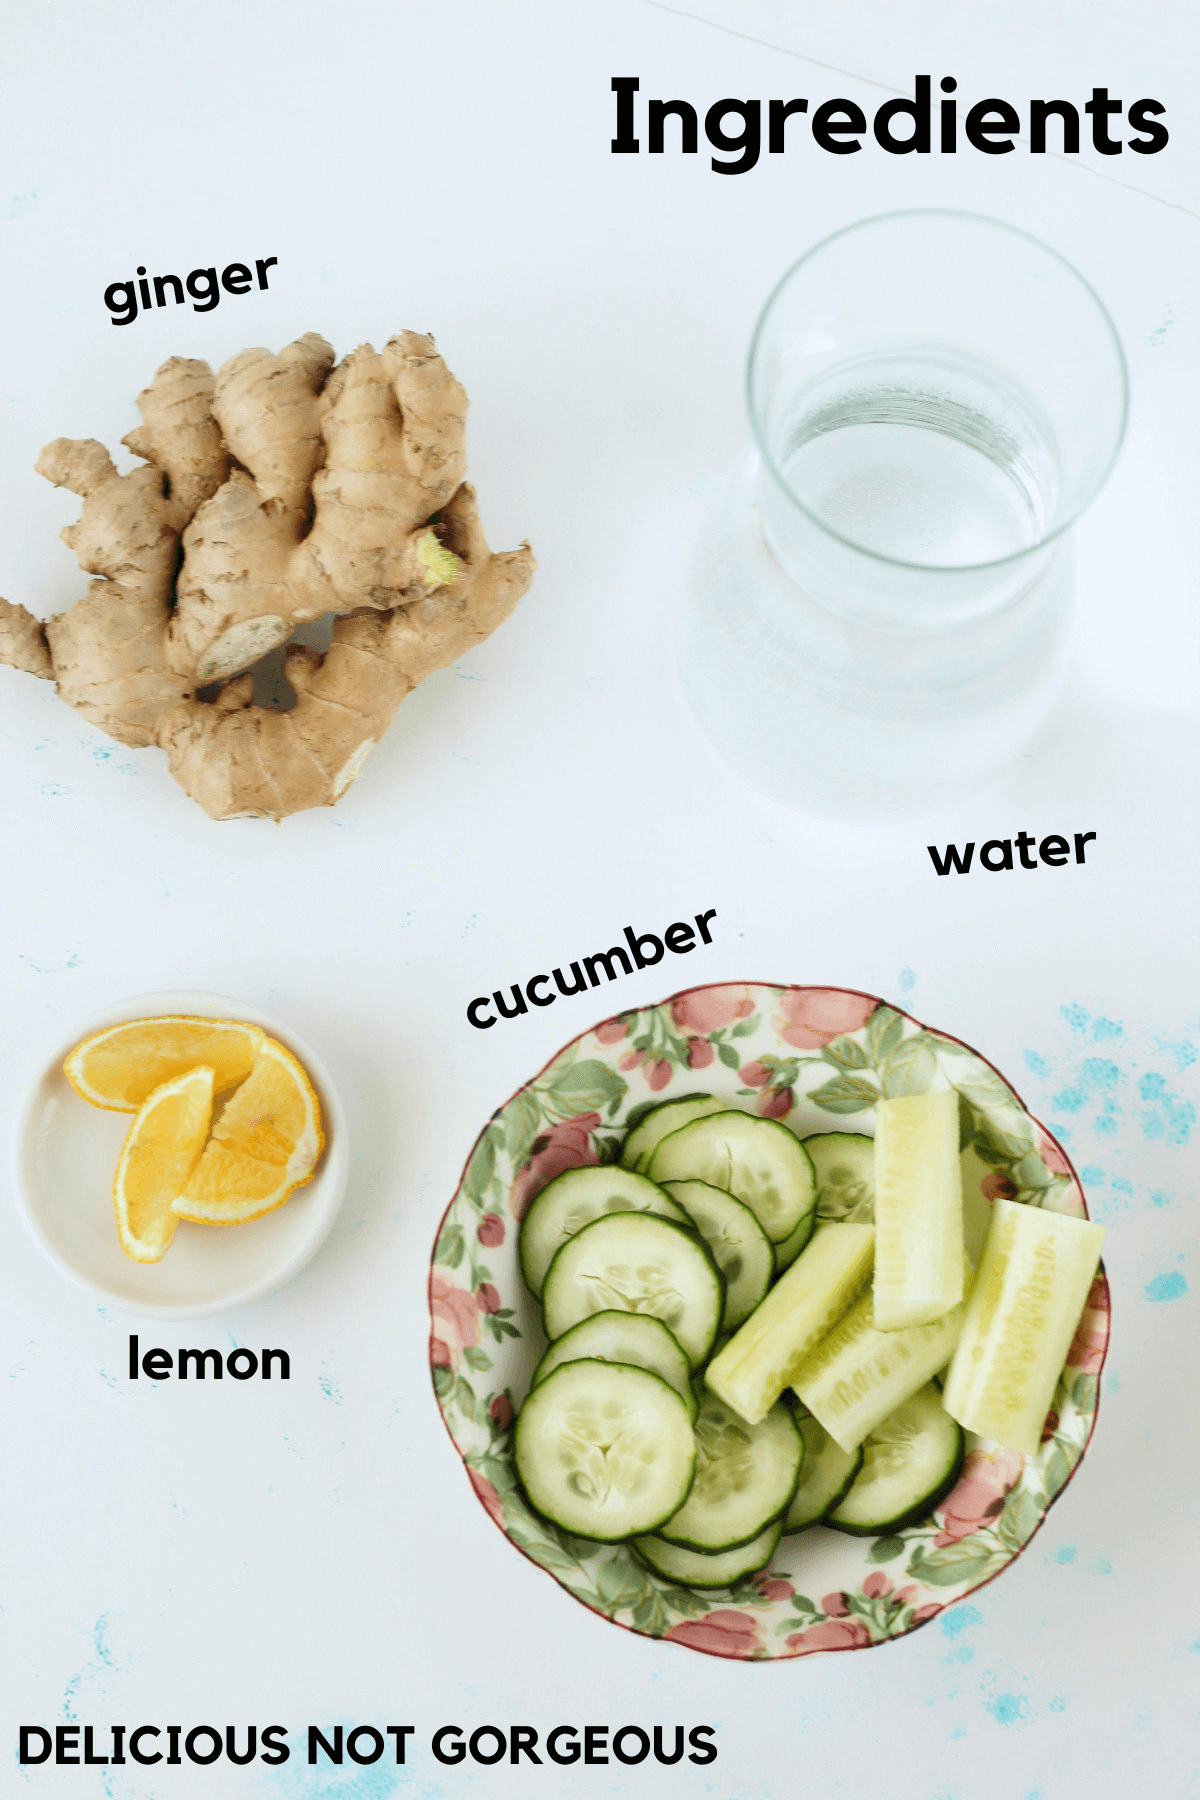 Ingredients laid out for the flavored water, including a pitcher of water, a bowl with cucumber spears and slices, lemon wedges, and some raw ginger root.